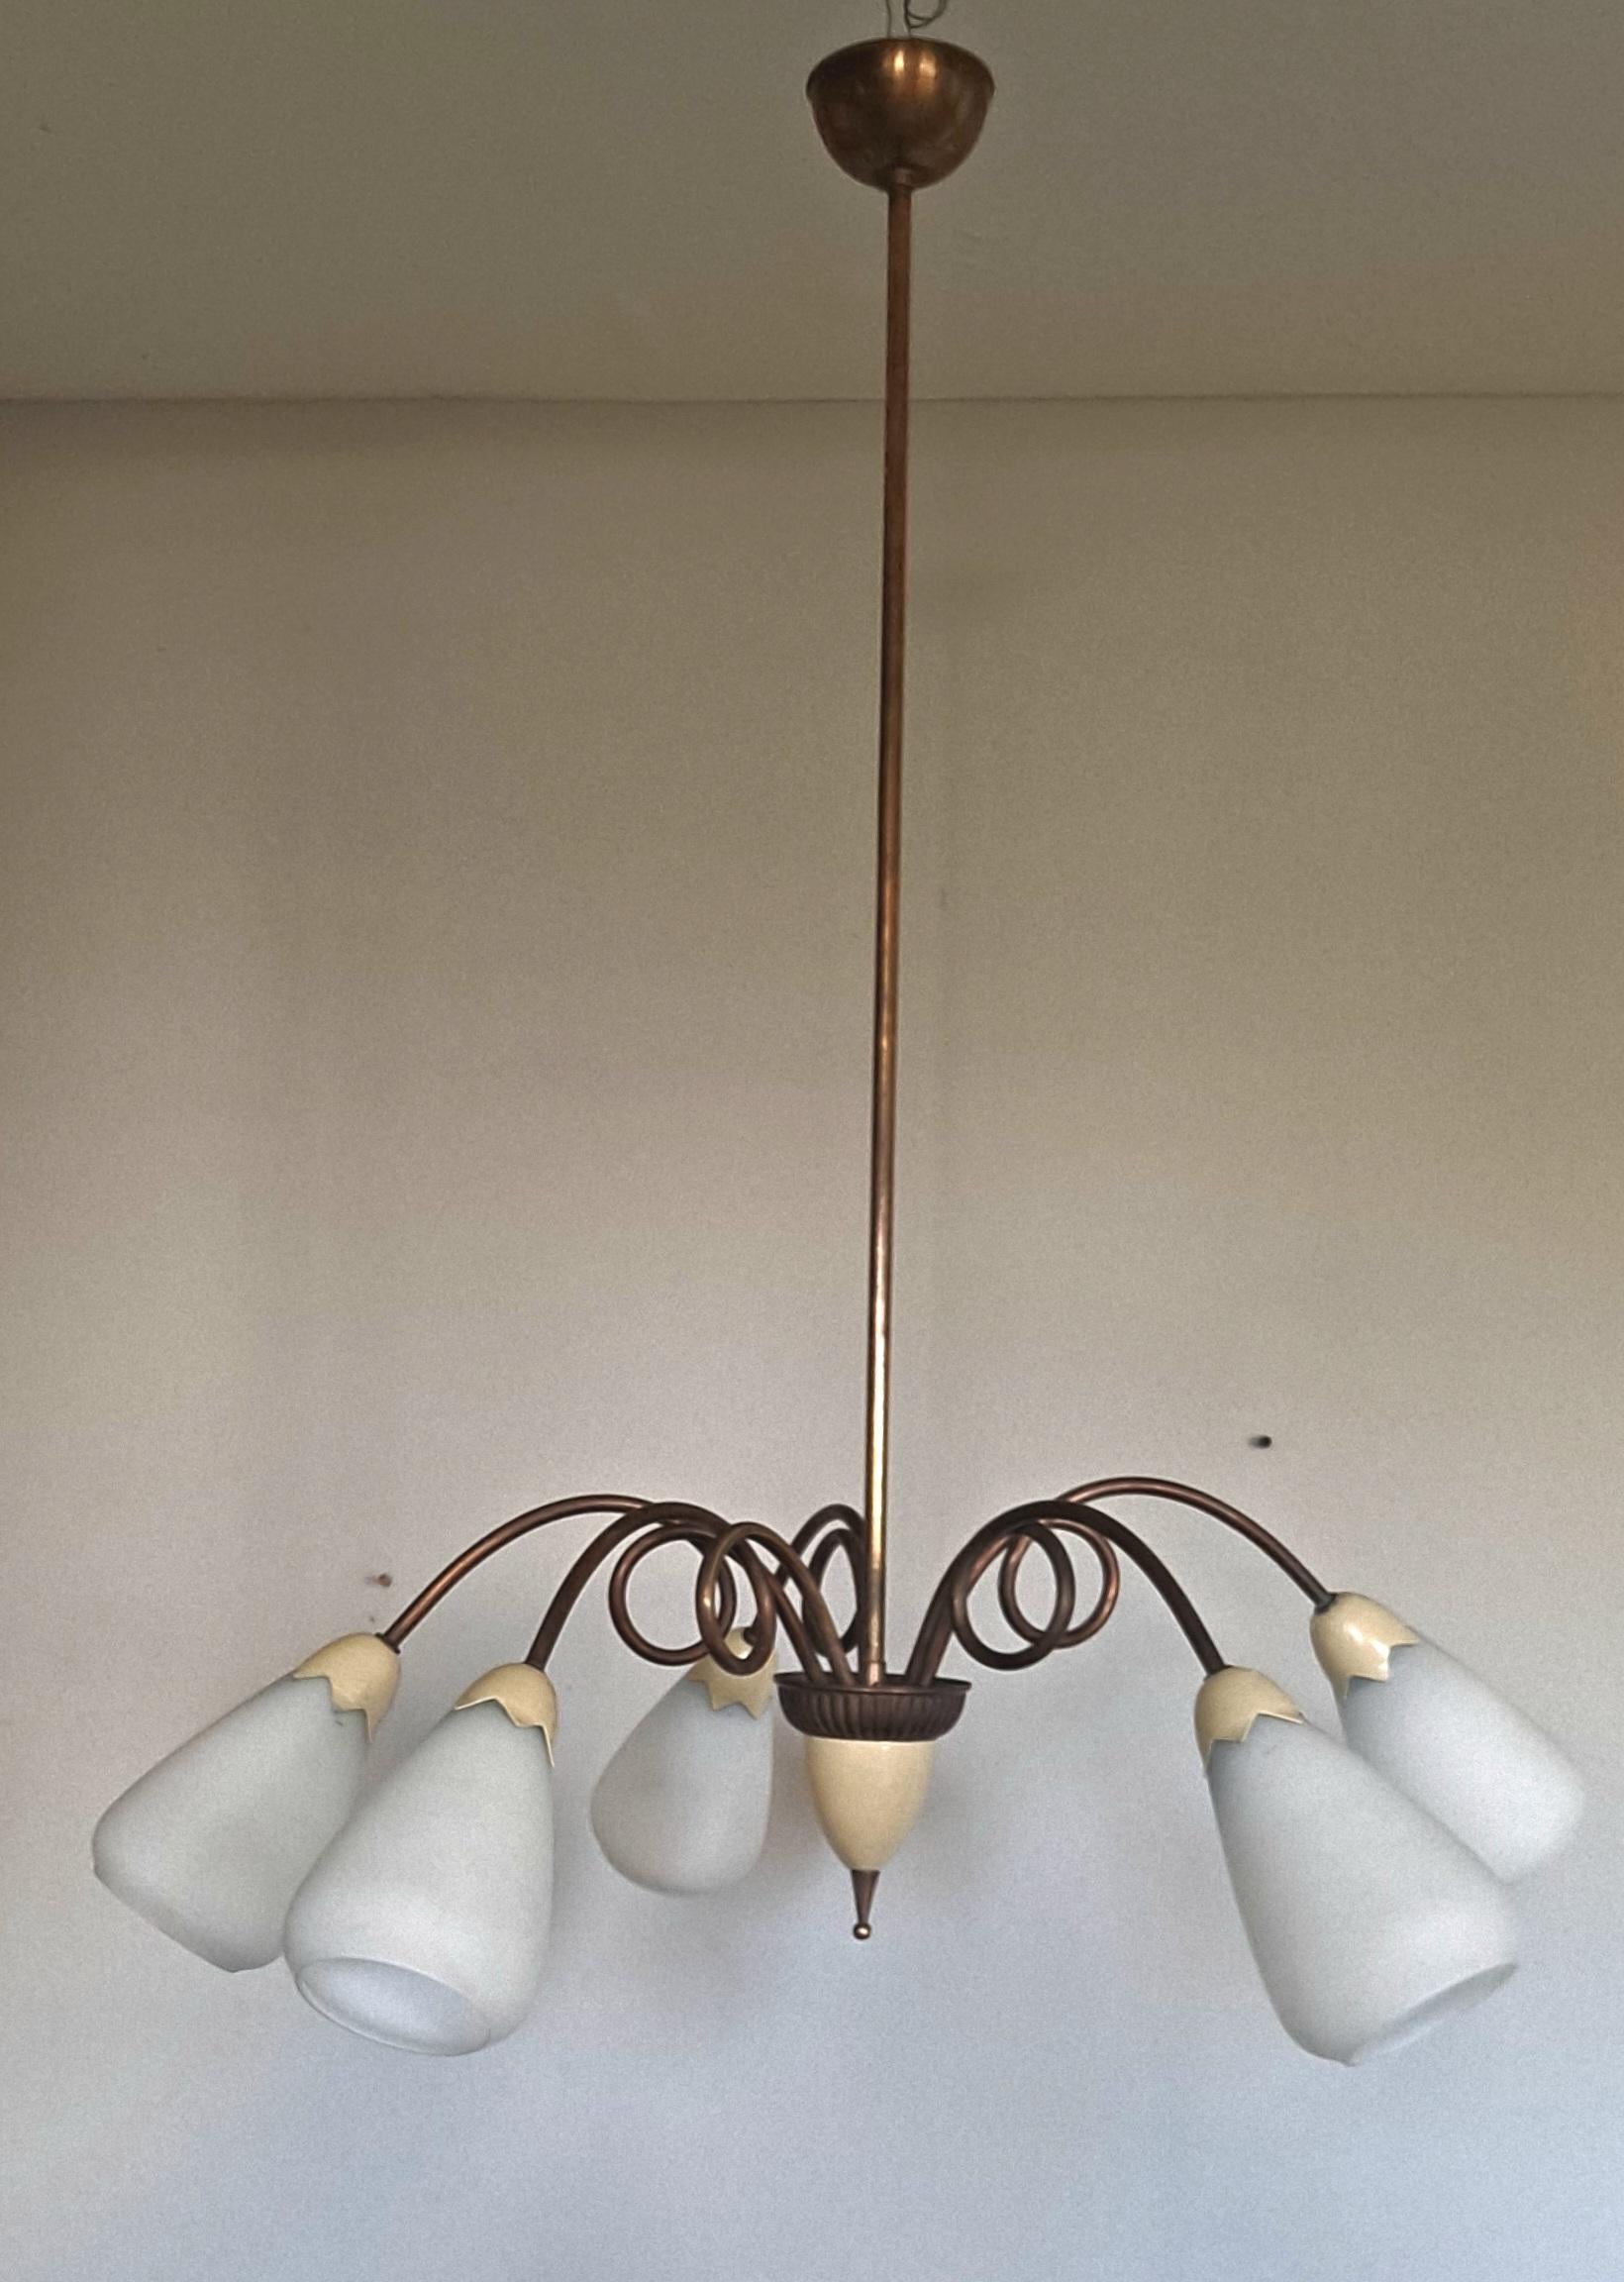 Pana cotta color with opaline glass shades on the Brass base. Romantic Venetian chandelier.
 